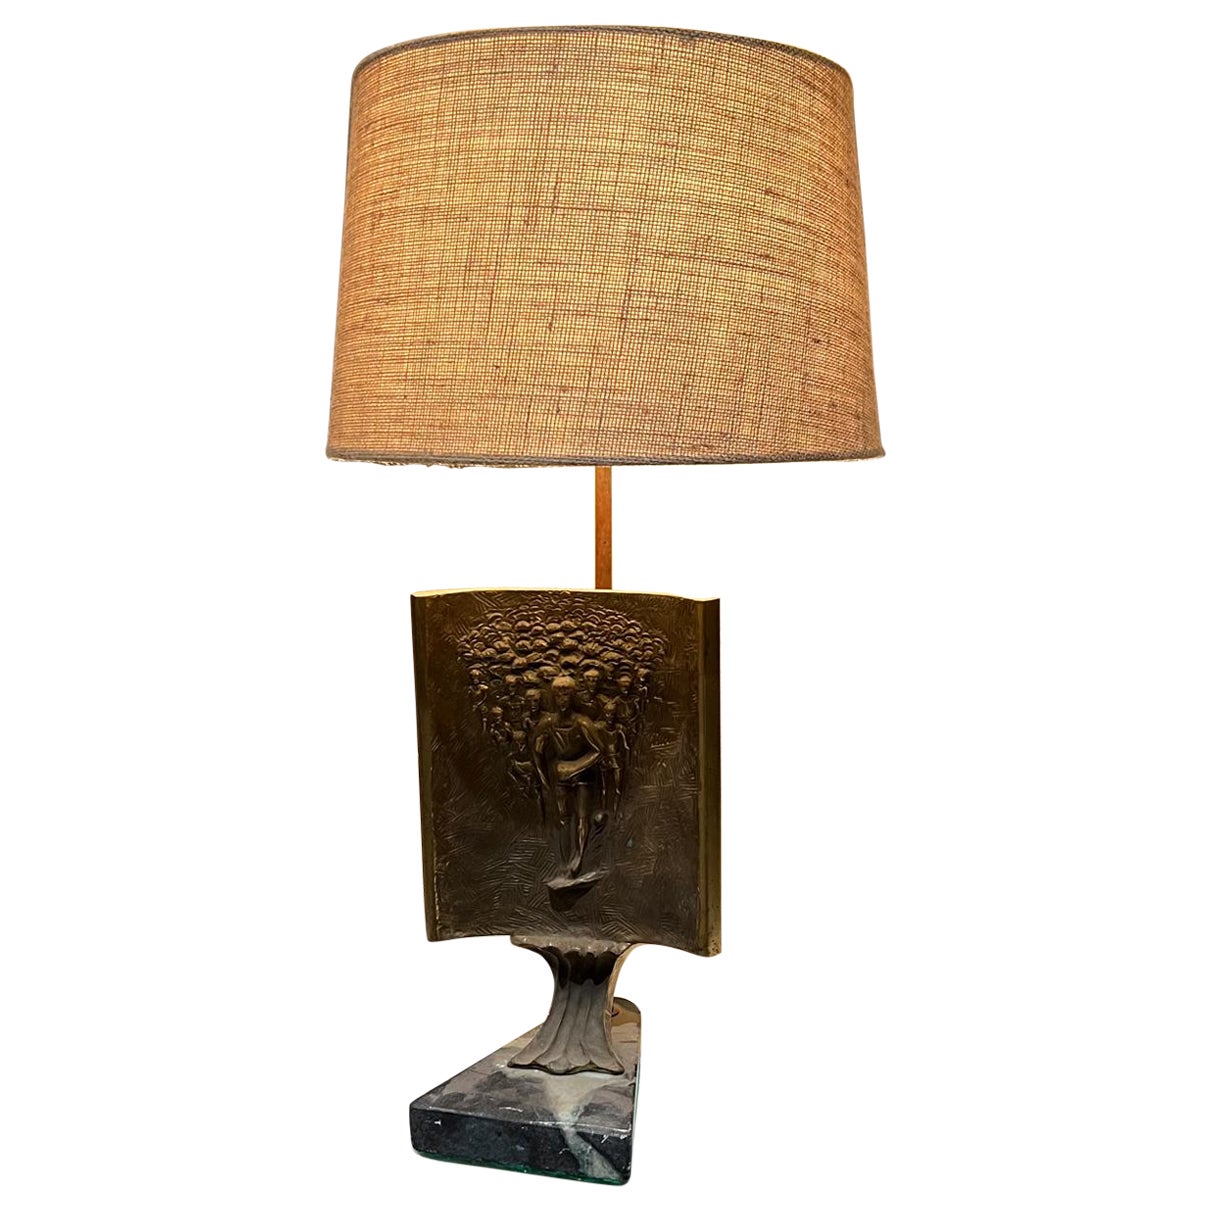 1960s Italian Table Lamp Art Mid Sculpture in Bronze Green Marble Base Italy